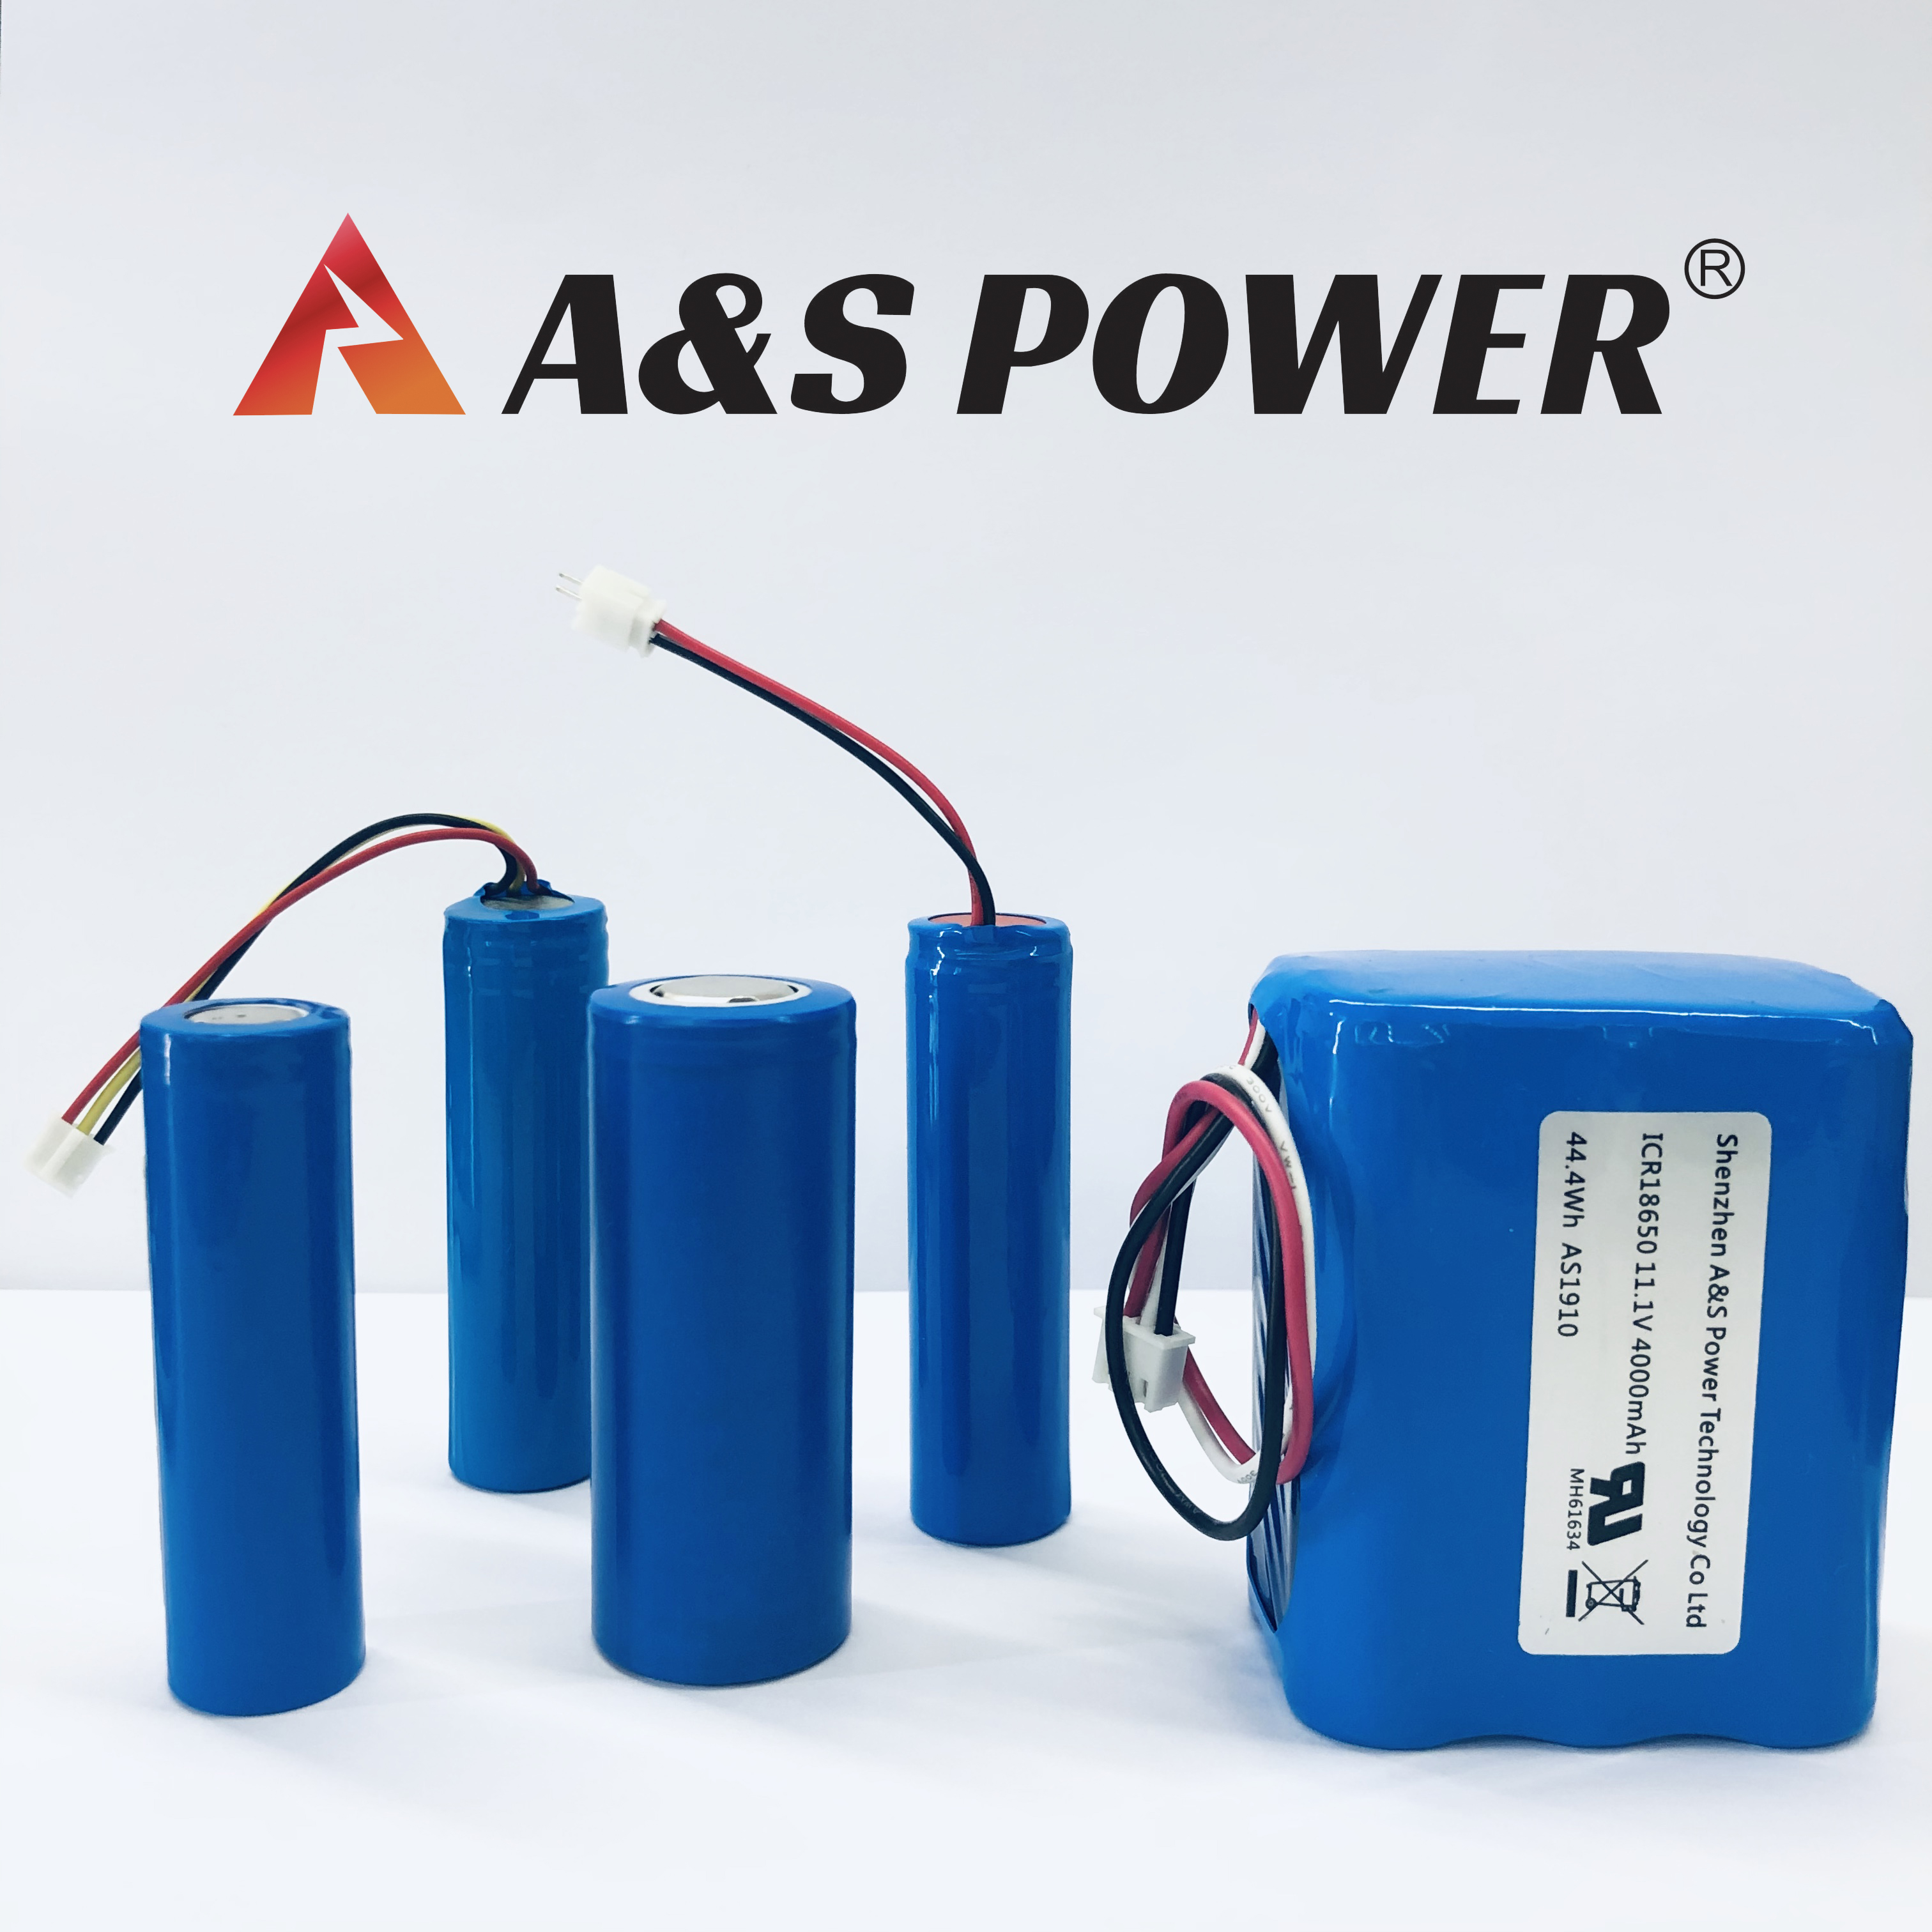 A&S Power 18650 Lithium Battery